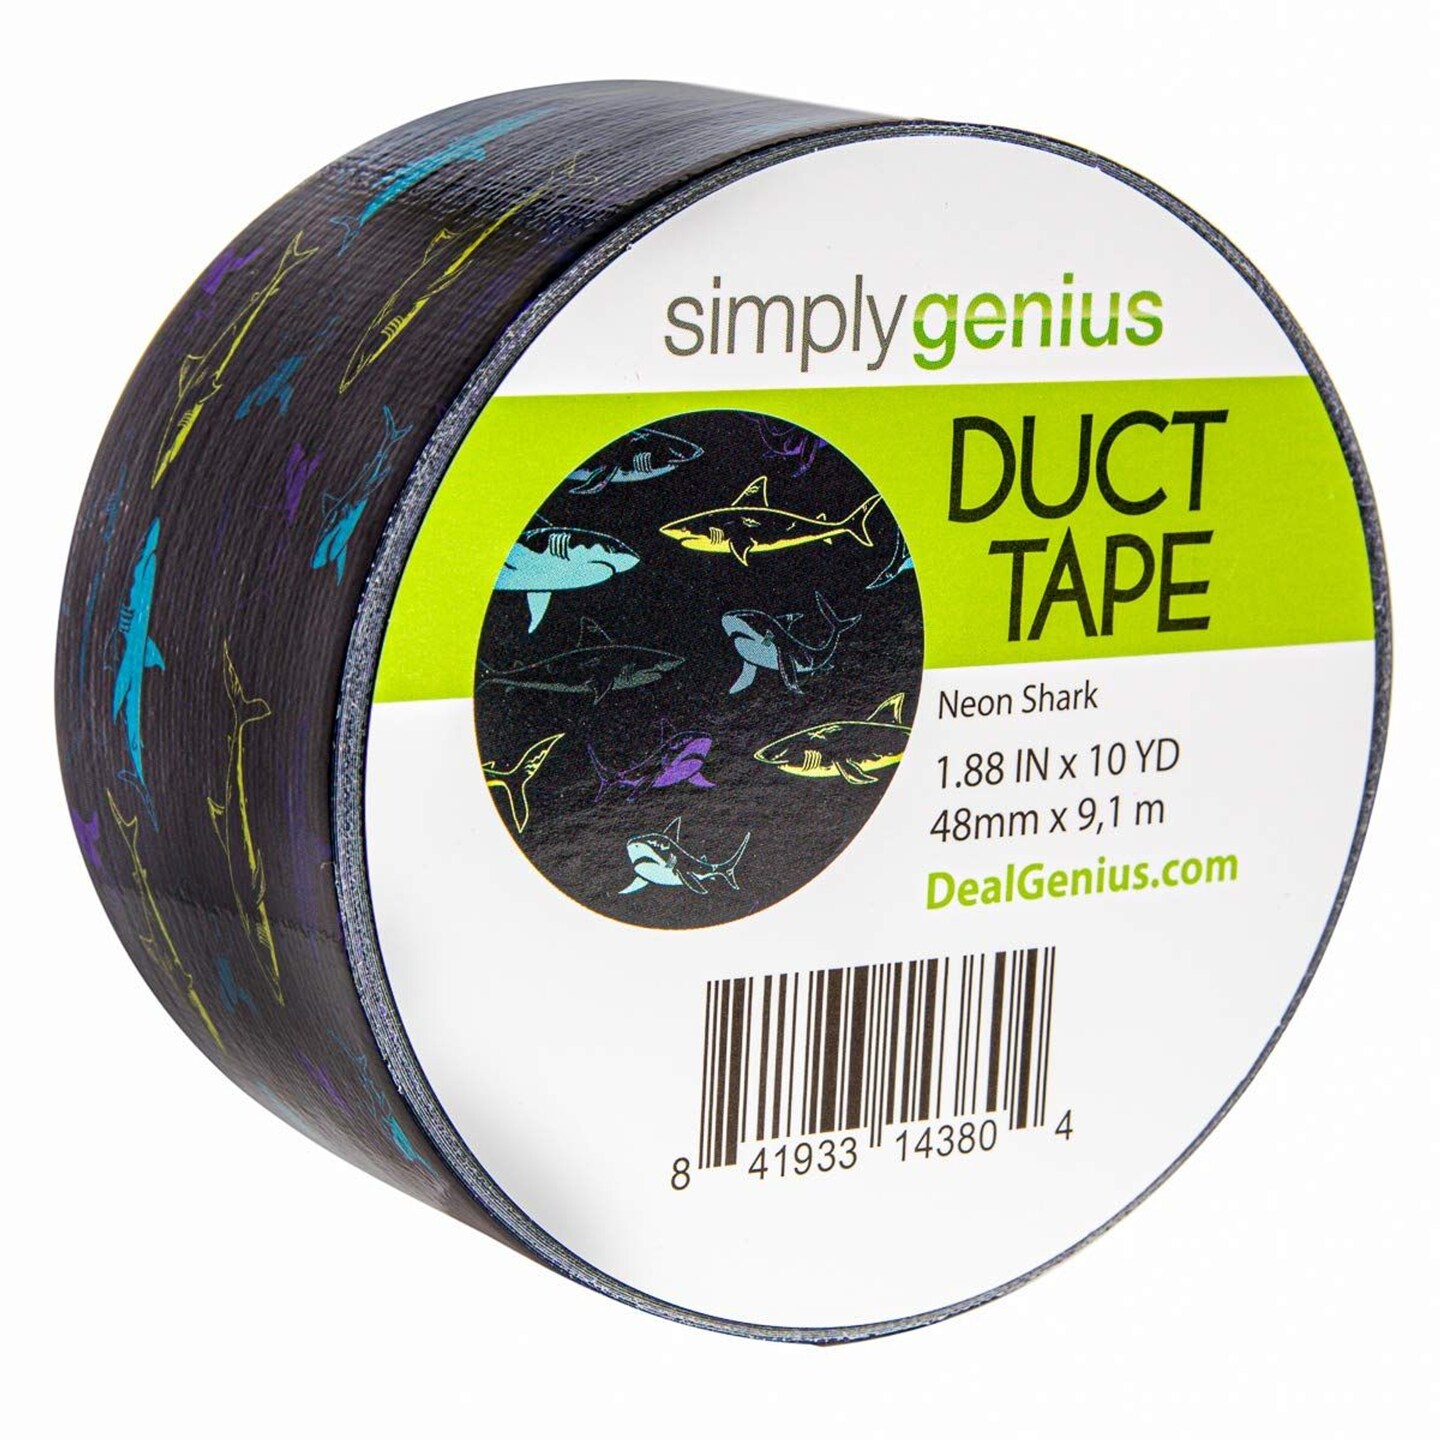 Simply Genius Pattern Duct Tape Heavy Duty - Craft Supplies for Kids &#x26; Adults - Colored Duct Tape - Single Roll 1.8 in x 10 yards - Colorful Tape for DIY, Craft &#x26; Home Improvement (Neon Shark)